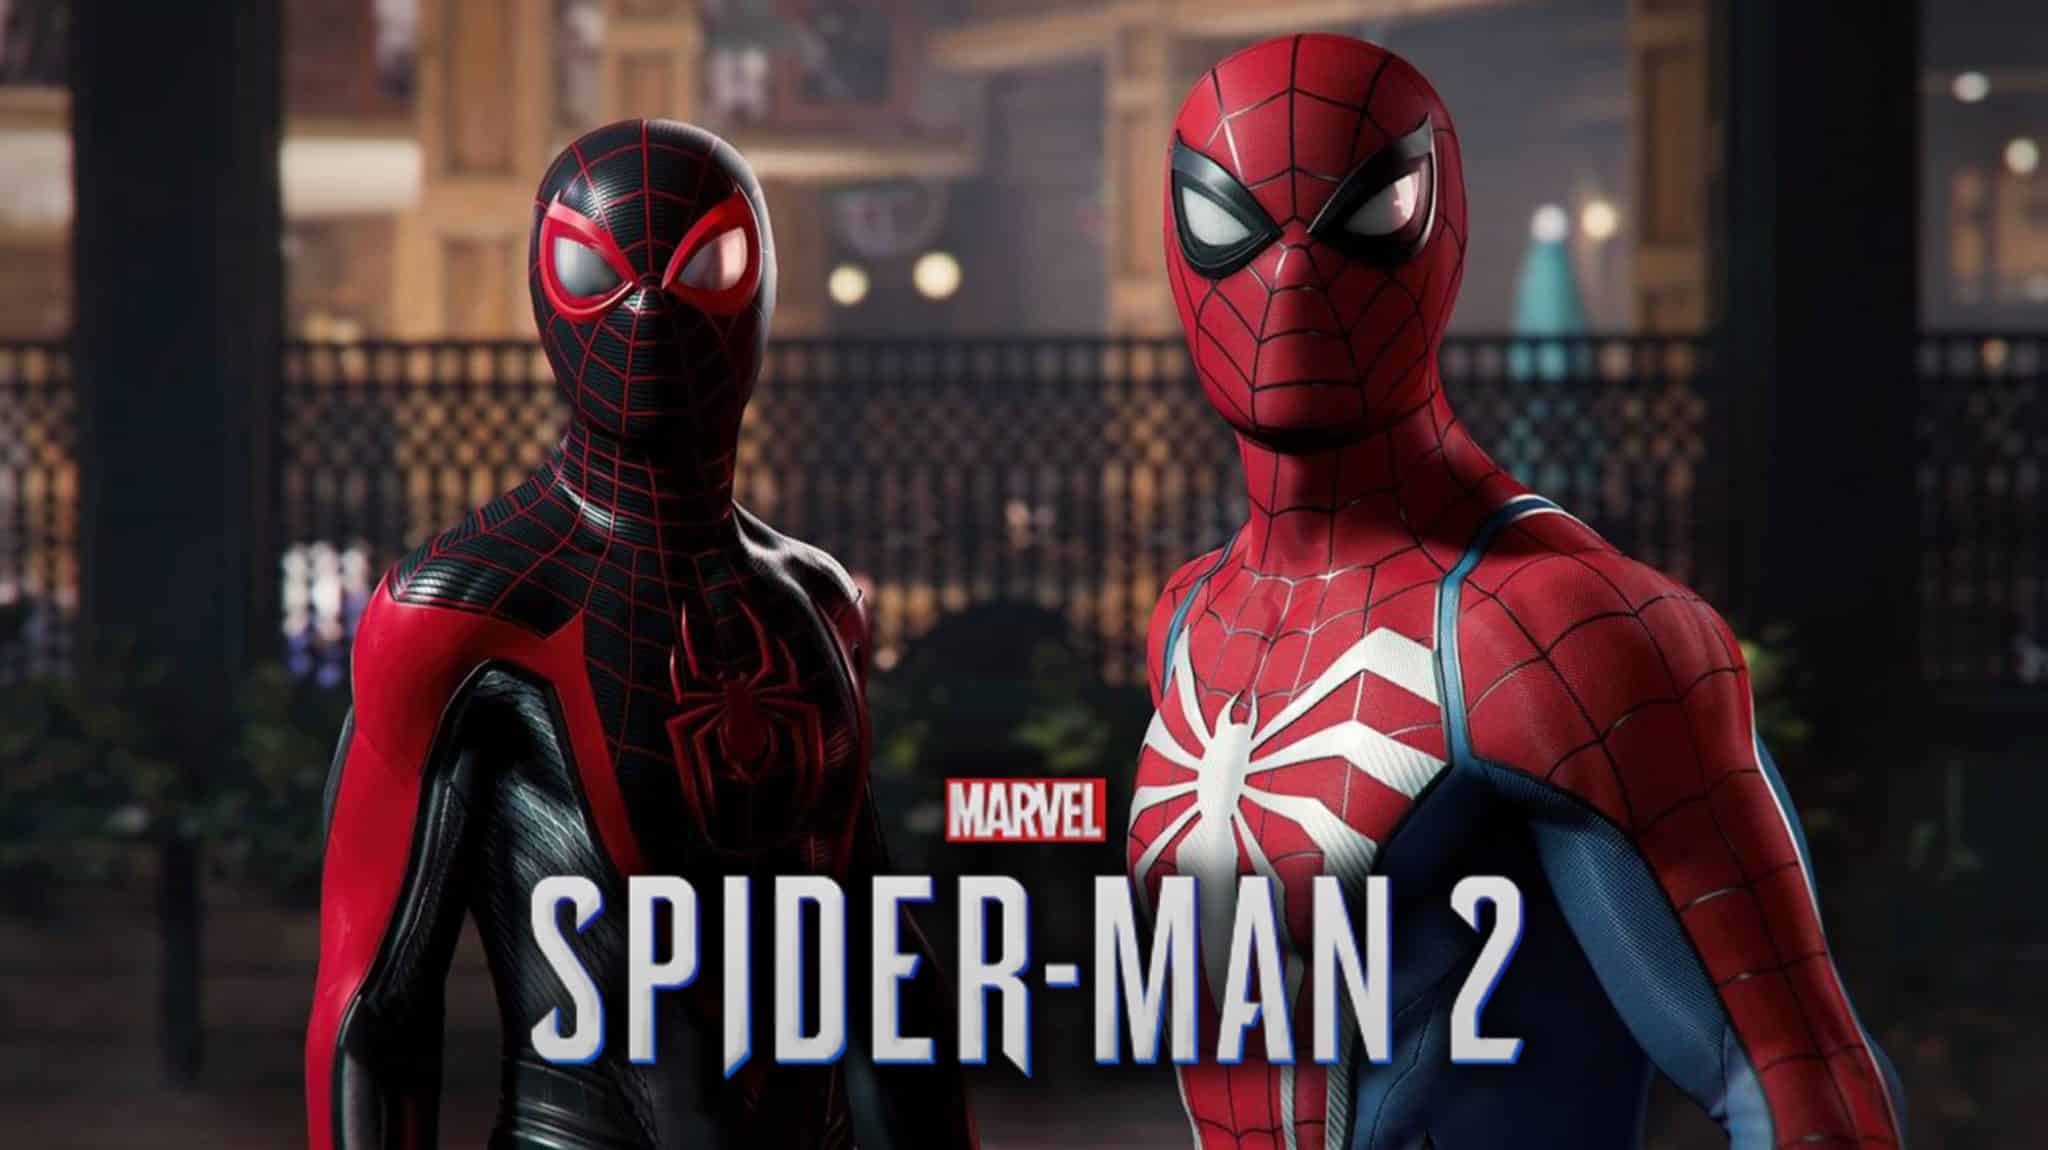 Peter Parker and Miles Morales with the Spider-Man 2 logo